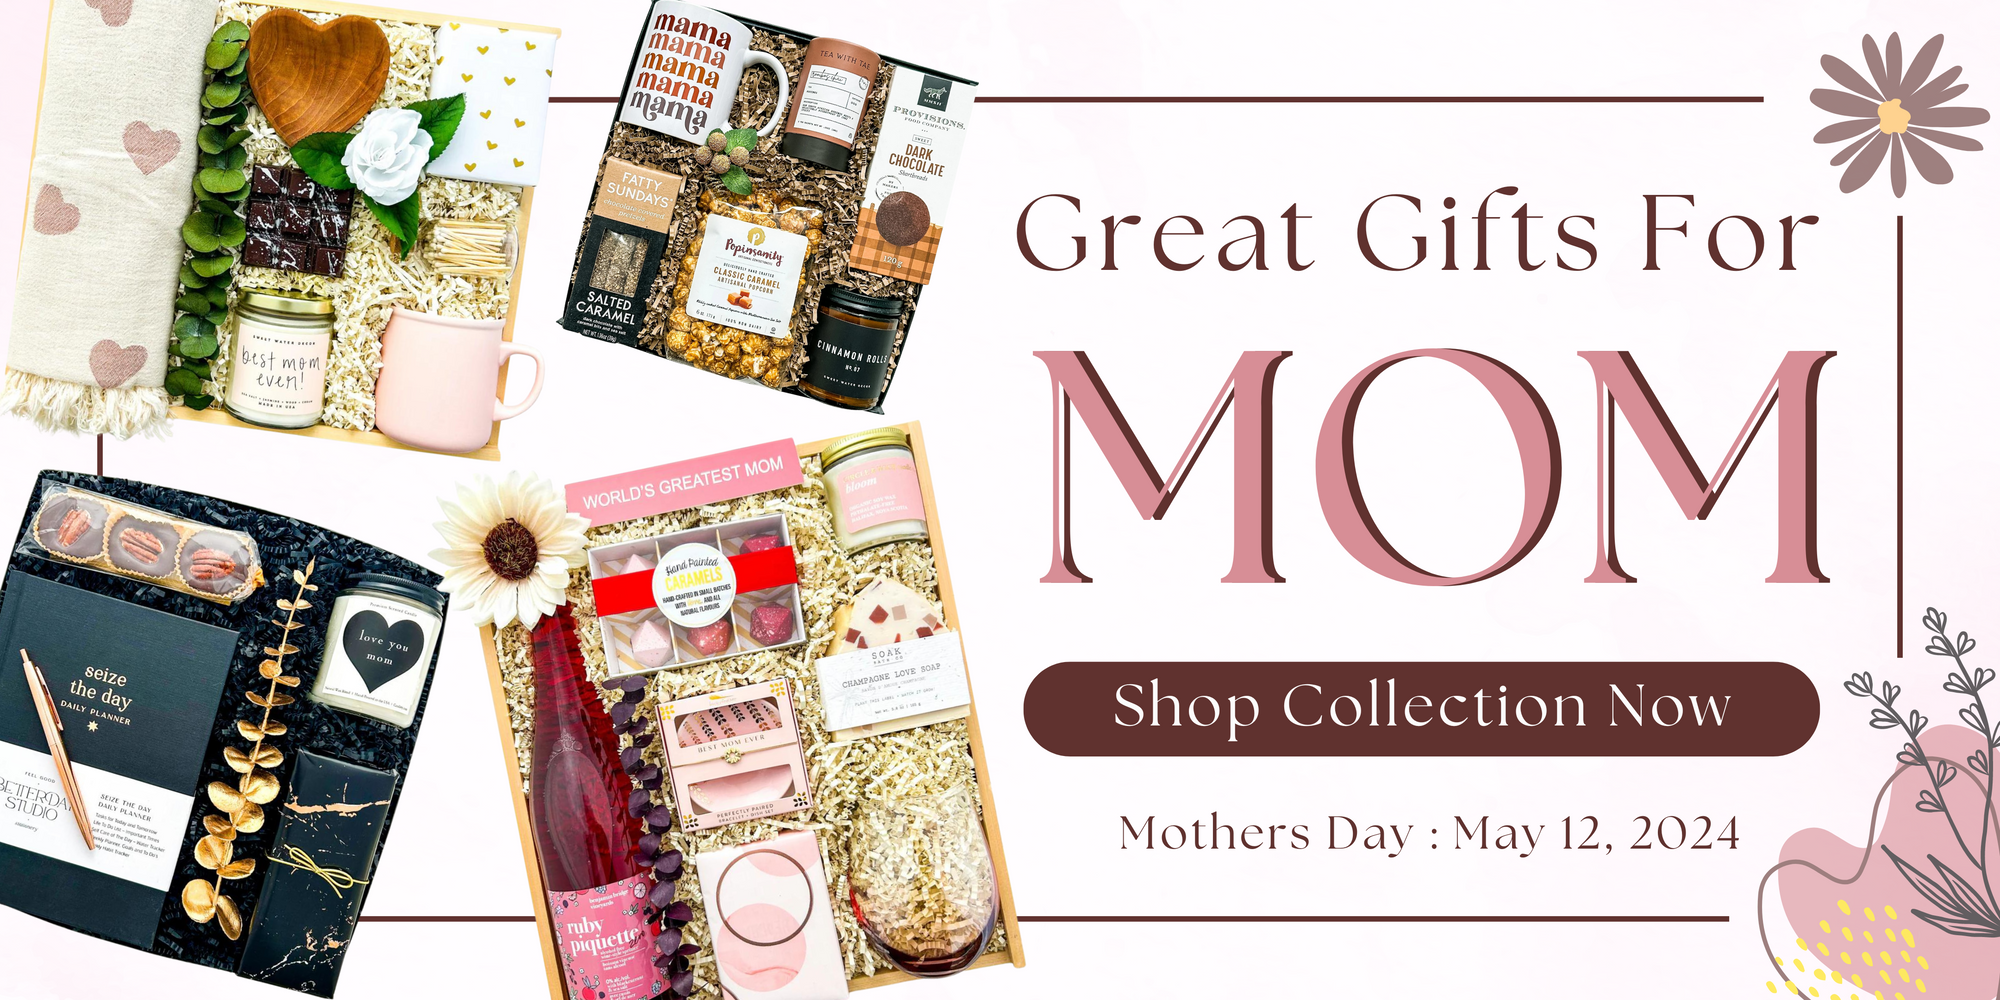 Mother's Day Gifts, Mother's Day Gift Baskets, Mother's Day Gift Boxes, Gifts for Mom, Unique Gifts for Mom, Gift Delivery for Mom, Shipped Gifts for Mom, Gift Ideas for Mom, Best gifts for mom, gifts mom's want, Custom Gifts for Mom, Mother's Day Boxes, Mother's Day Baskets, Mothers Day gift baskets, mothers day gift boxes, luxury gifts for mom, budget-friendly gifts for mom